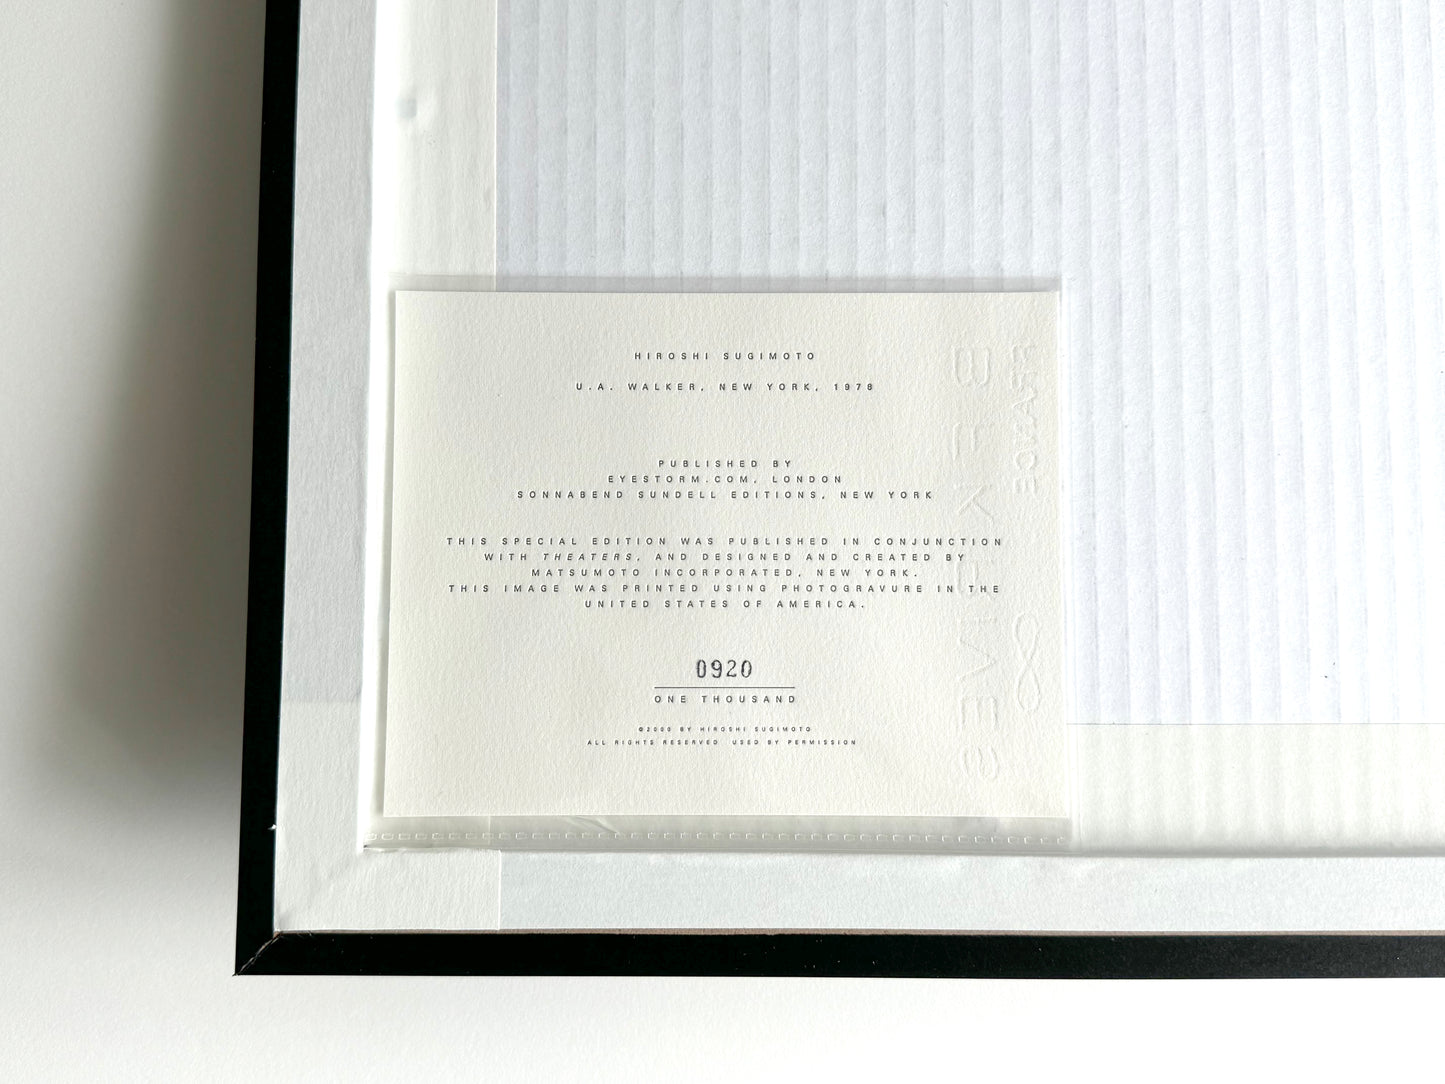 Hiroshi Sugimoto U.A. Walker, 1978 Photogravure label and edition number on frame